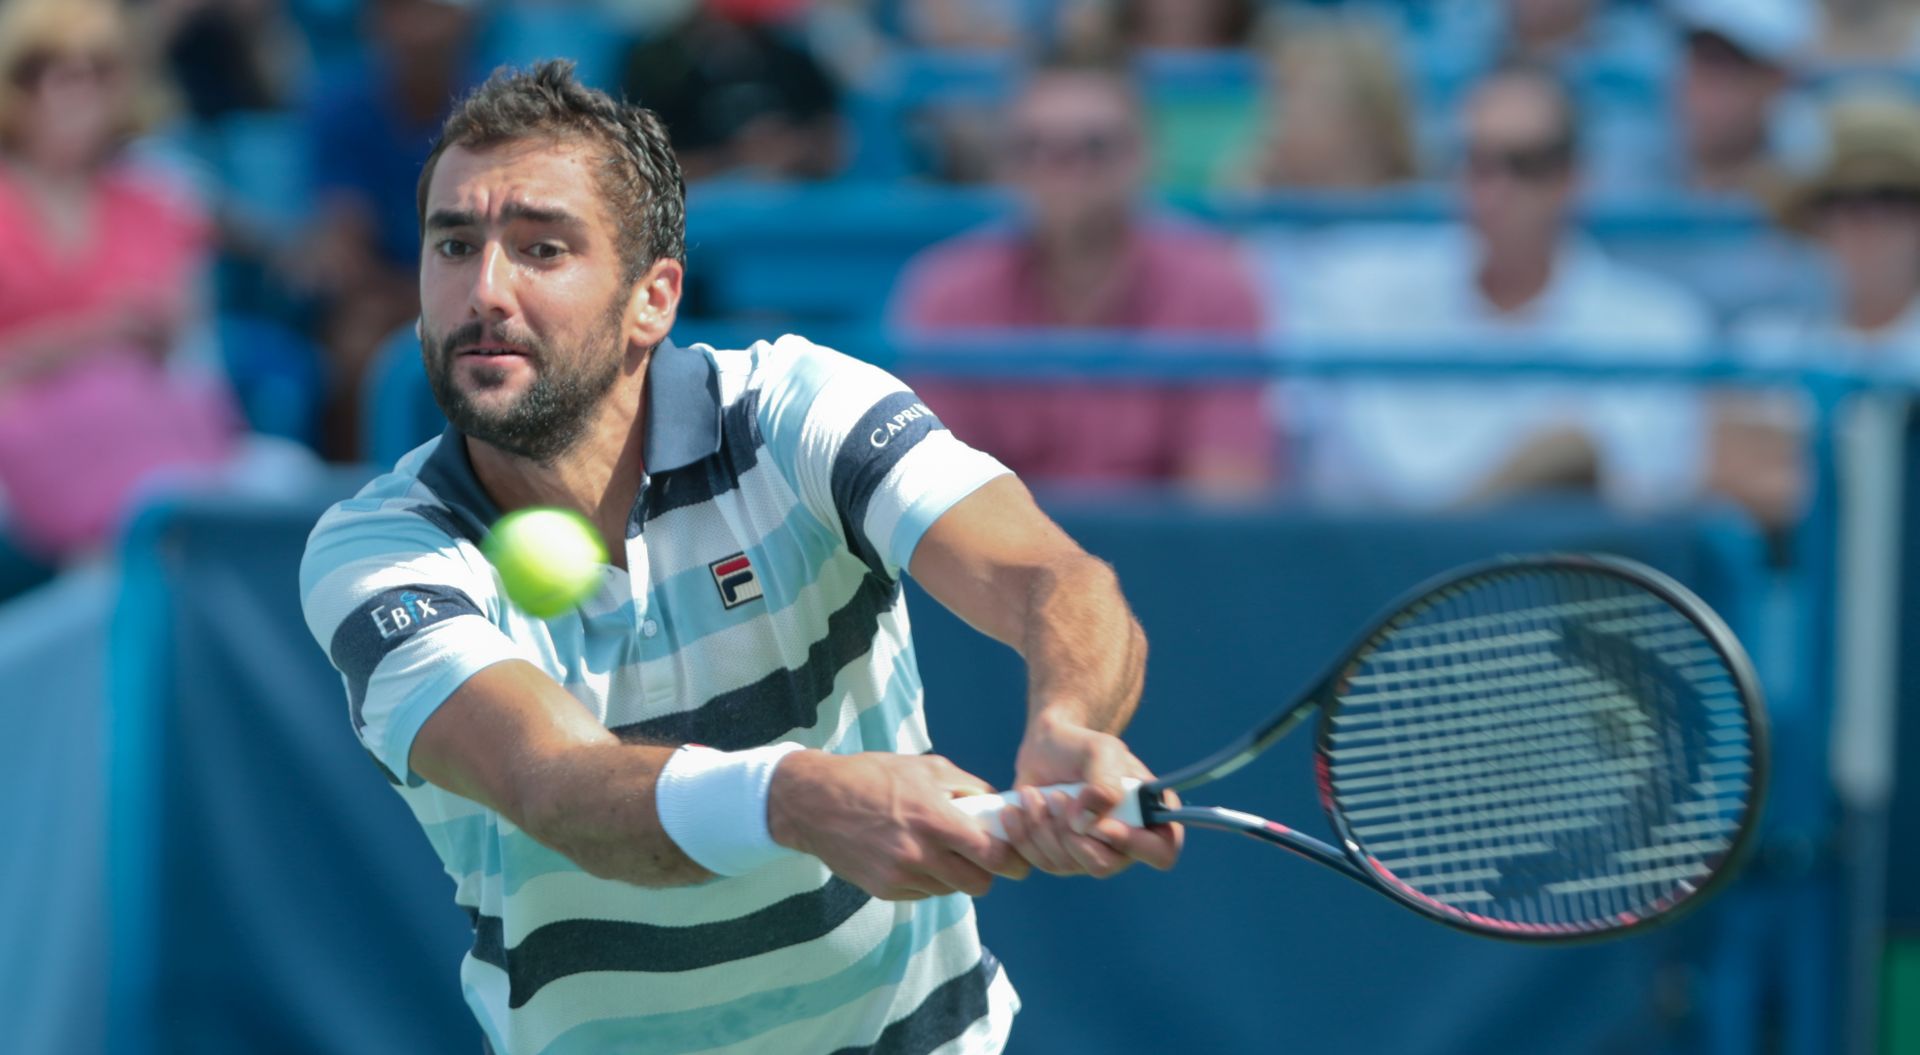 epa06957332 Marin Cilic of Croatia in action against Novak Djokovic of Serbia in their semi-final match in the Western & Southern Open tennis tournament at the Lindner Family Tennis Center in Mason, Ohio, USA, 18 August 2018.  EPA/MARK LYONS